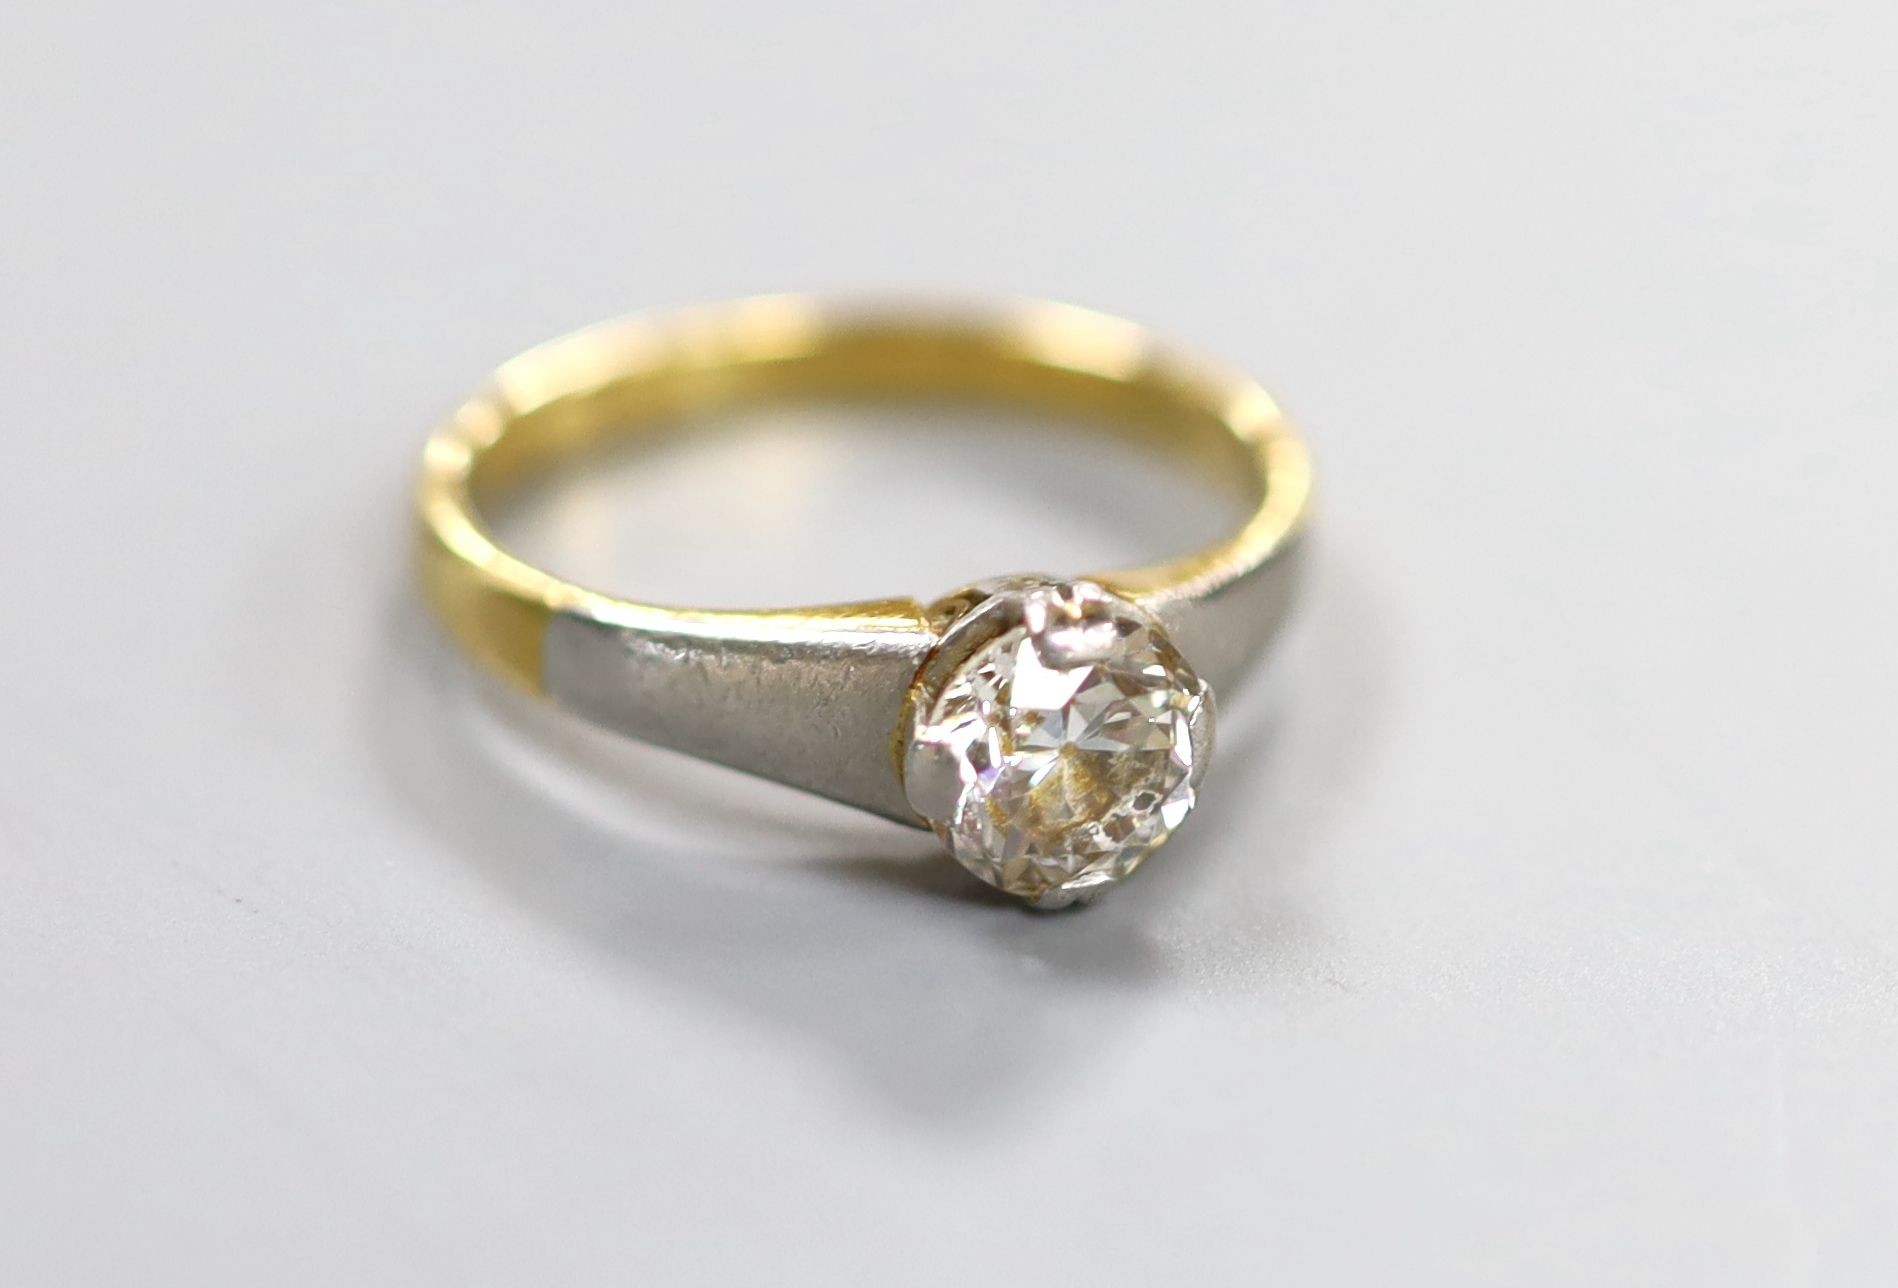 A yellow metal and solitaire diamond ring, the stone weighing approx. 0.75-0.80ct, size K, gross weight 3.5 grams.